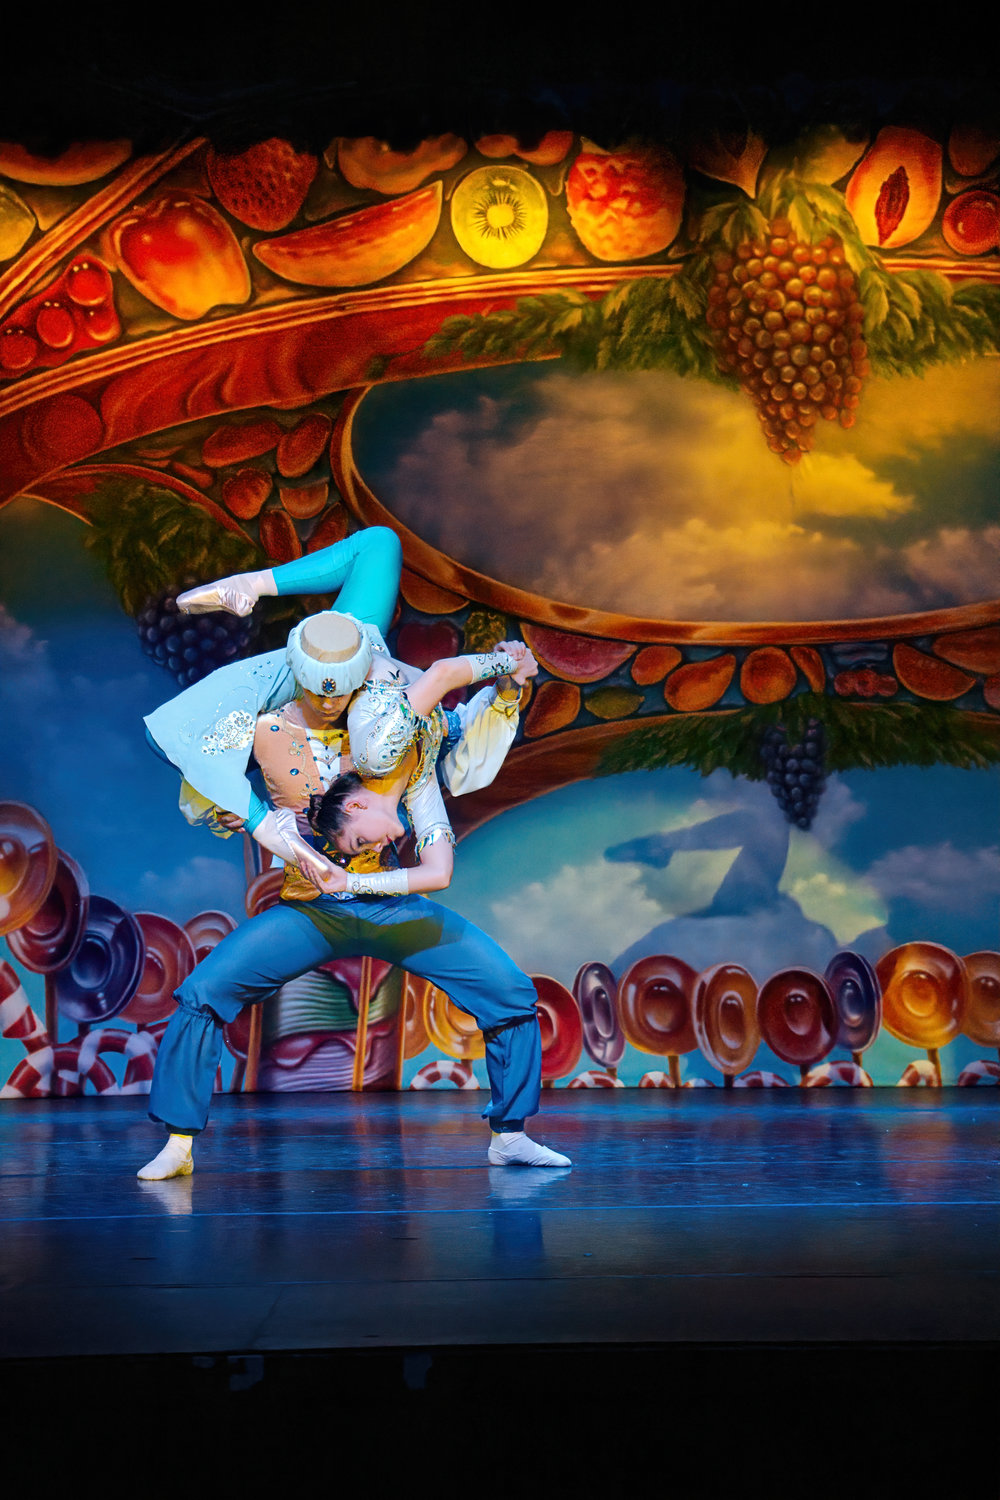 Borderlands Ballet Company offers two of the several “Nutcracker” nights across southern New Mexico. This production can be seen on Dec. 16-18 at the NMSU Center of the Arts.